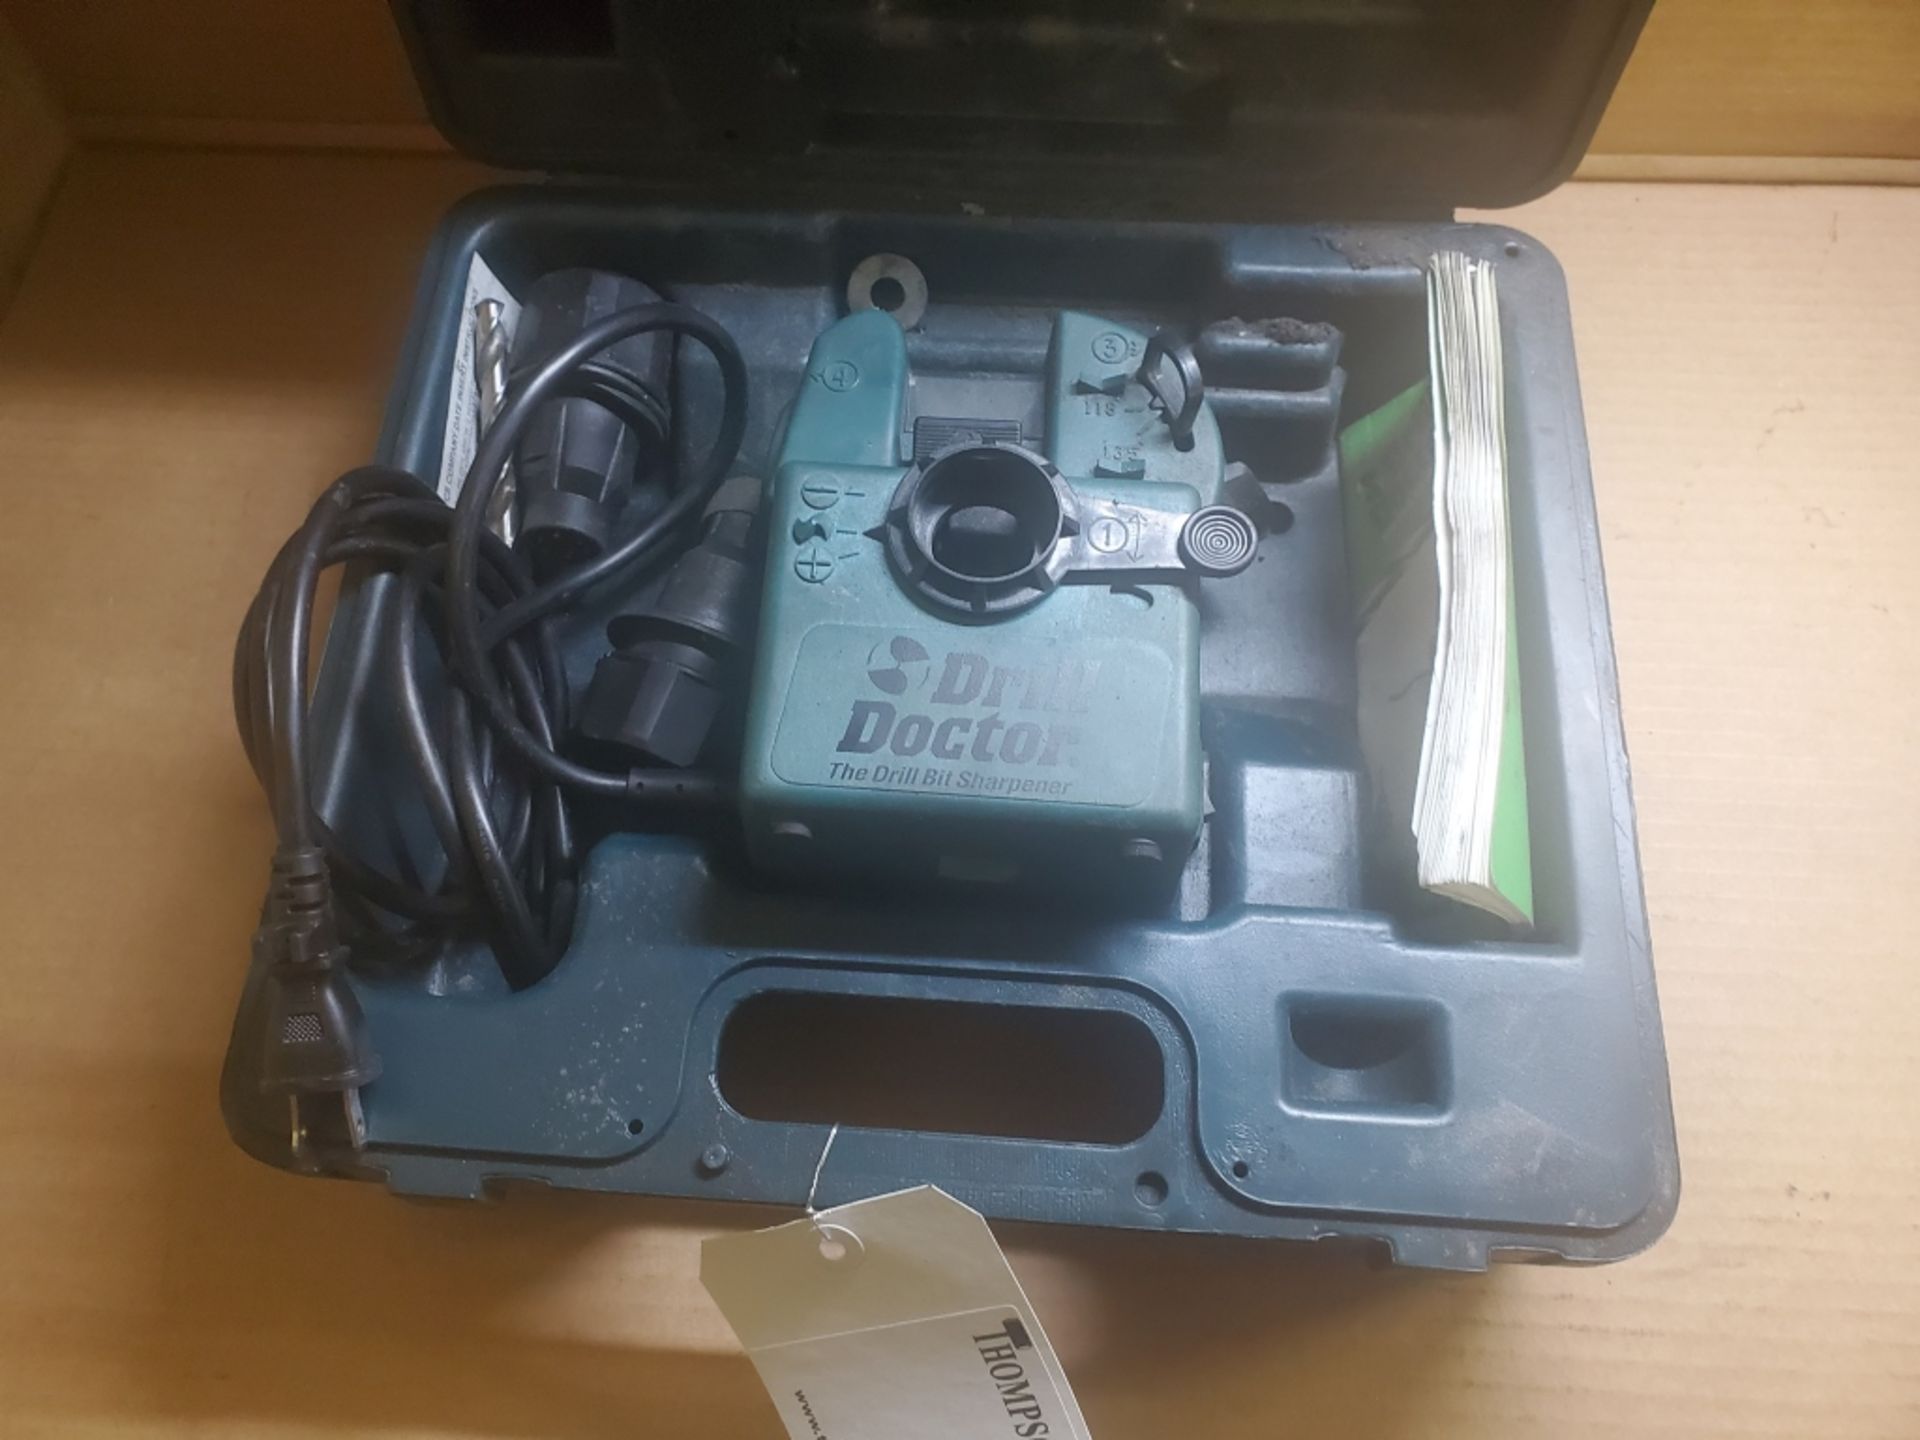 Drill Doctor Model 750 Drill Bit Sharpener With Case and Manual - Image 2 of 6